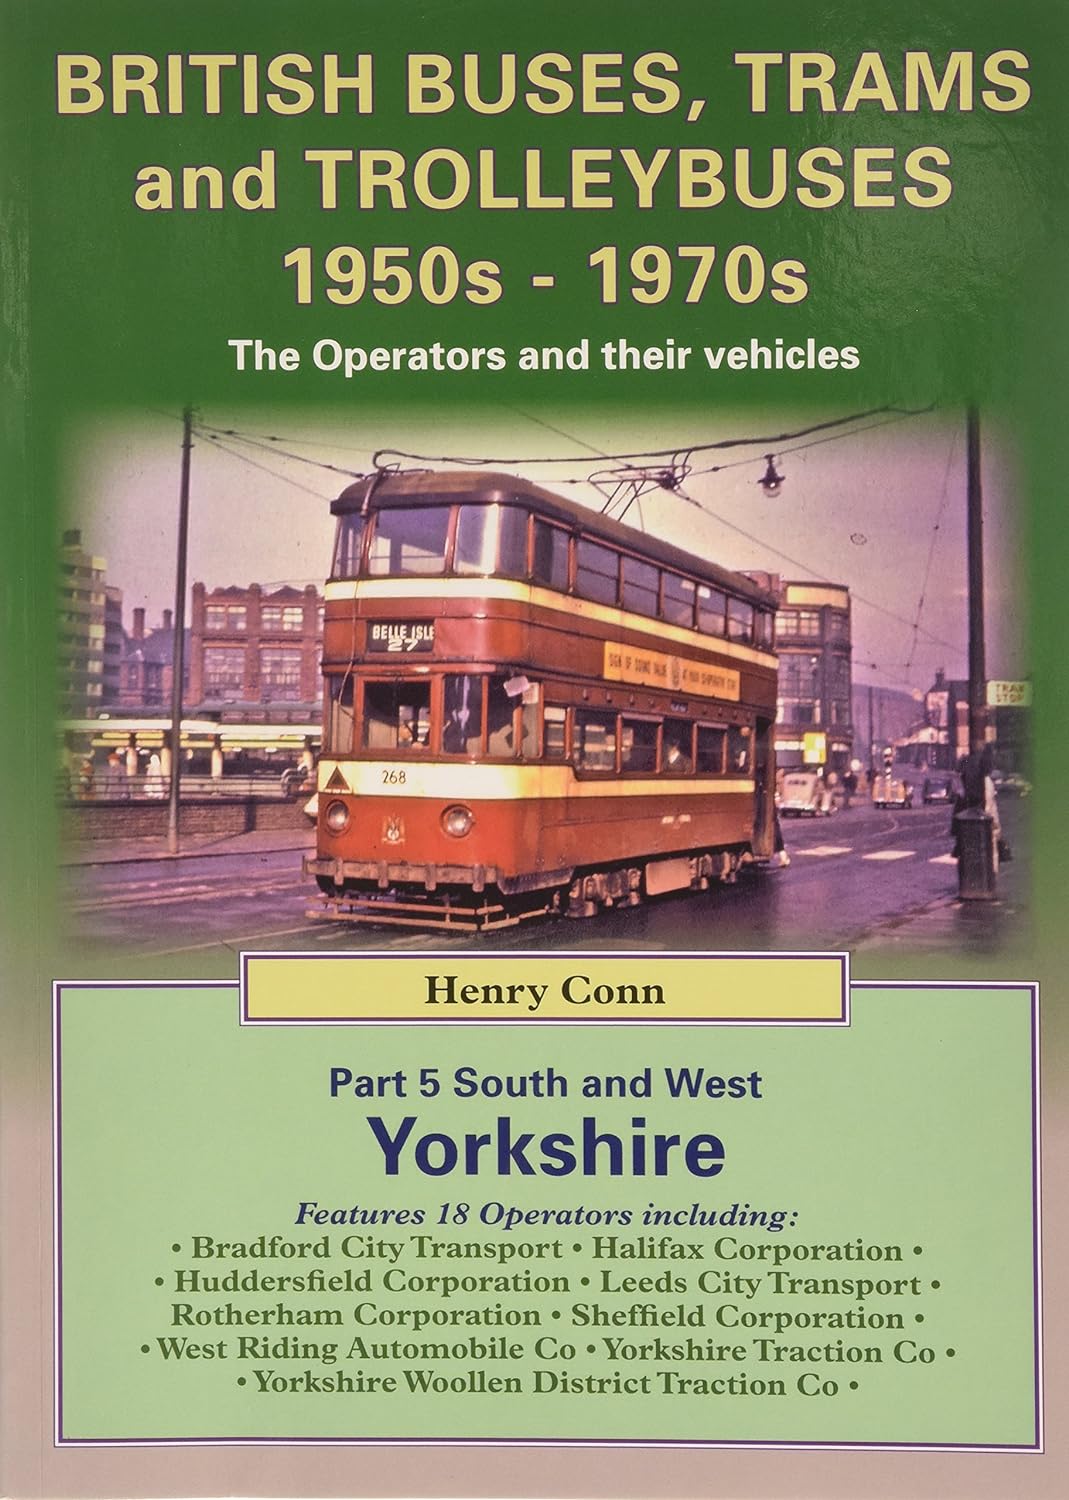 British Buses, Trams &Trolleybuses Part 5: South, and West Yorkshire